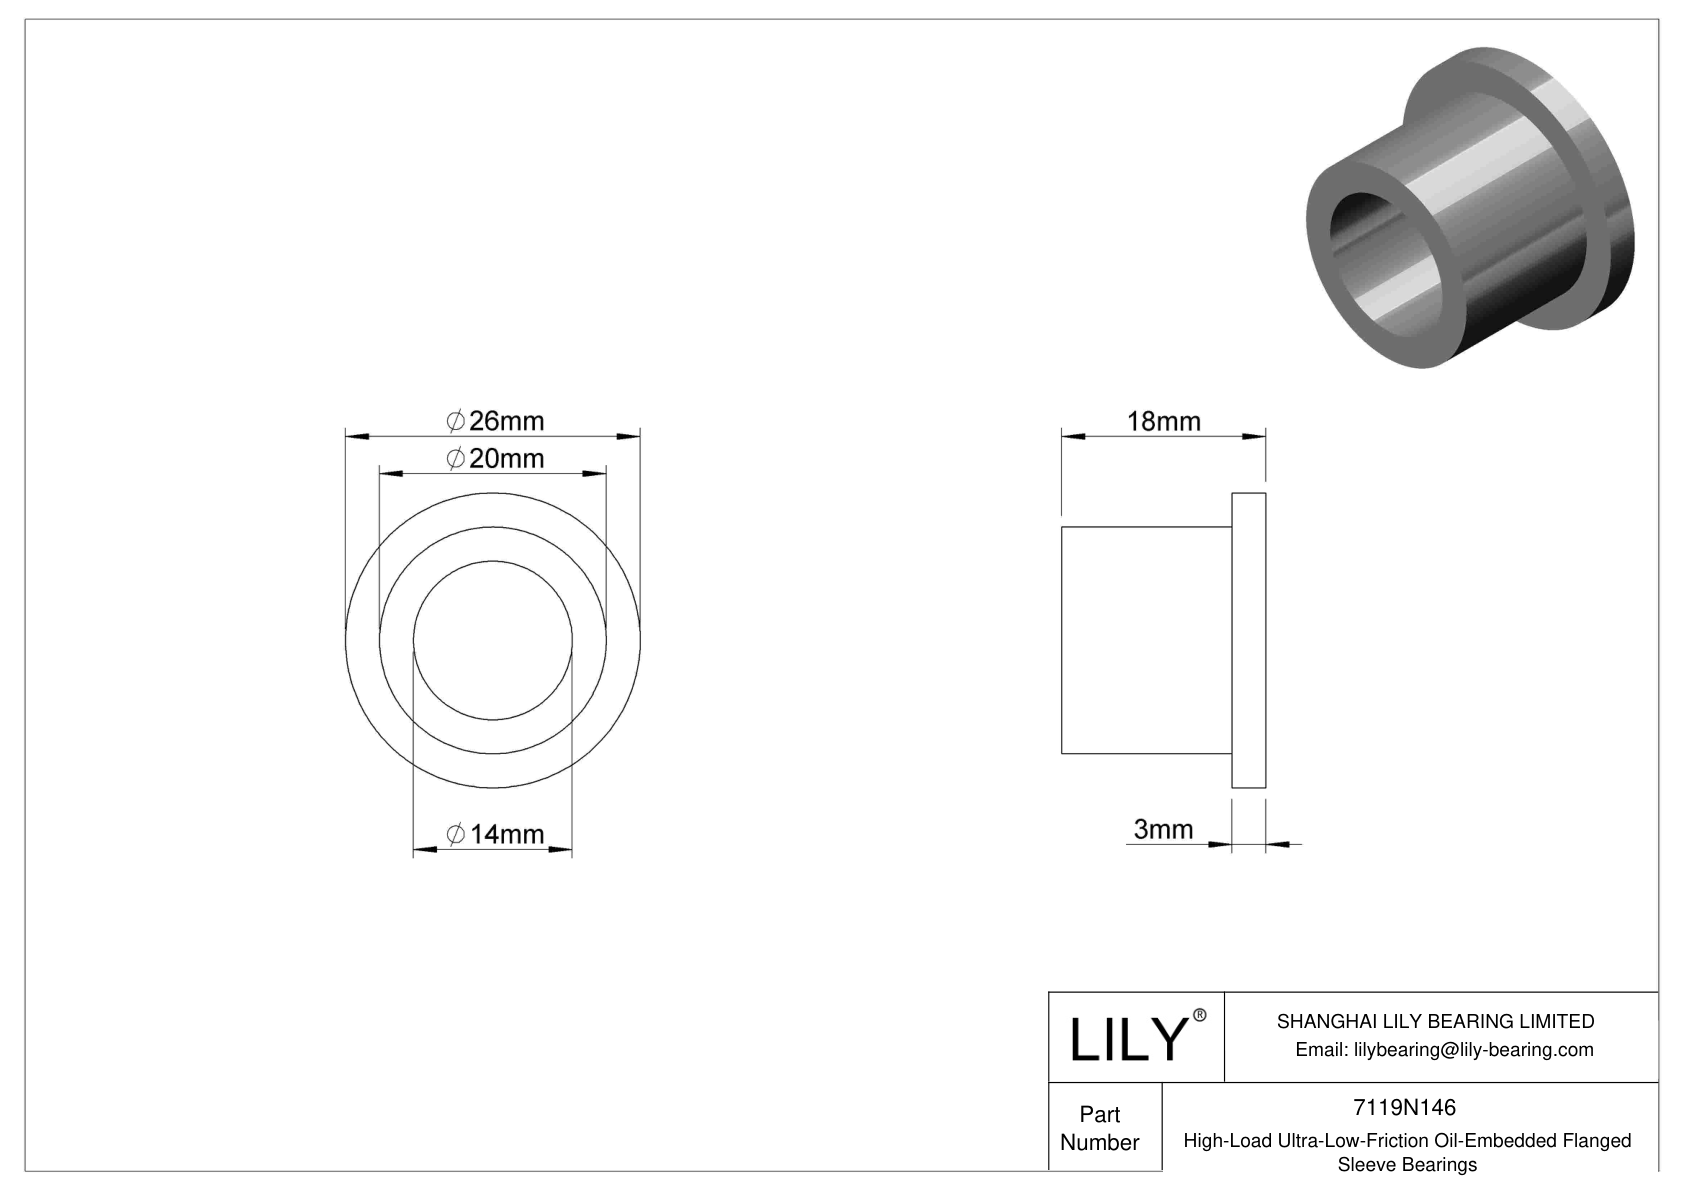 HBBJNBEG High-Load Ultra-Low-Friction Oil-Embedded Flanged Sleeve Bearings cad drawing